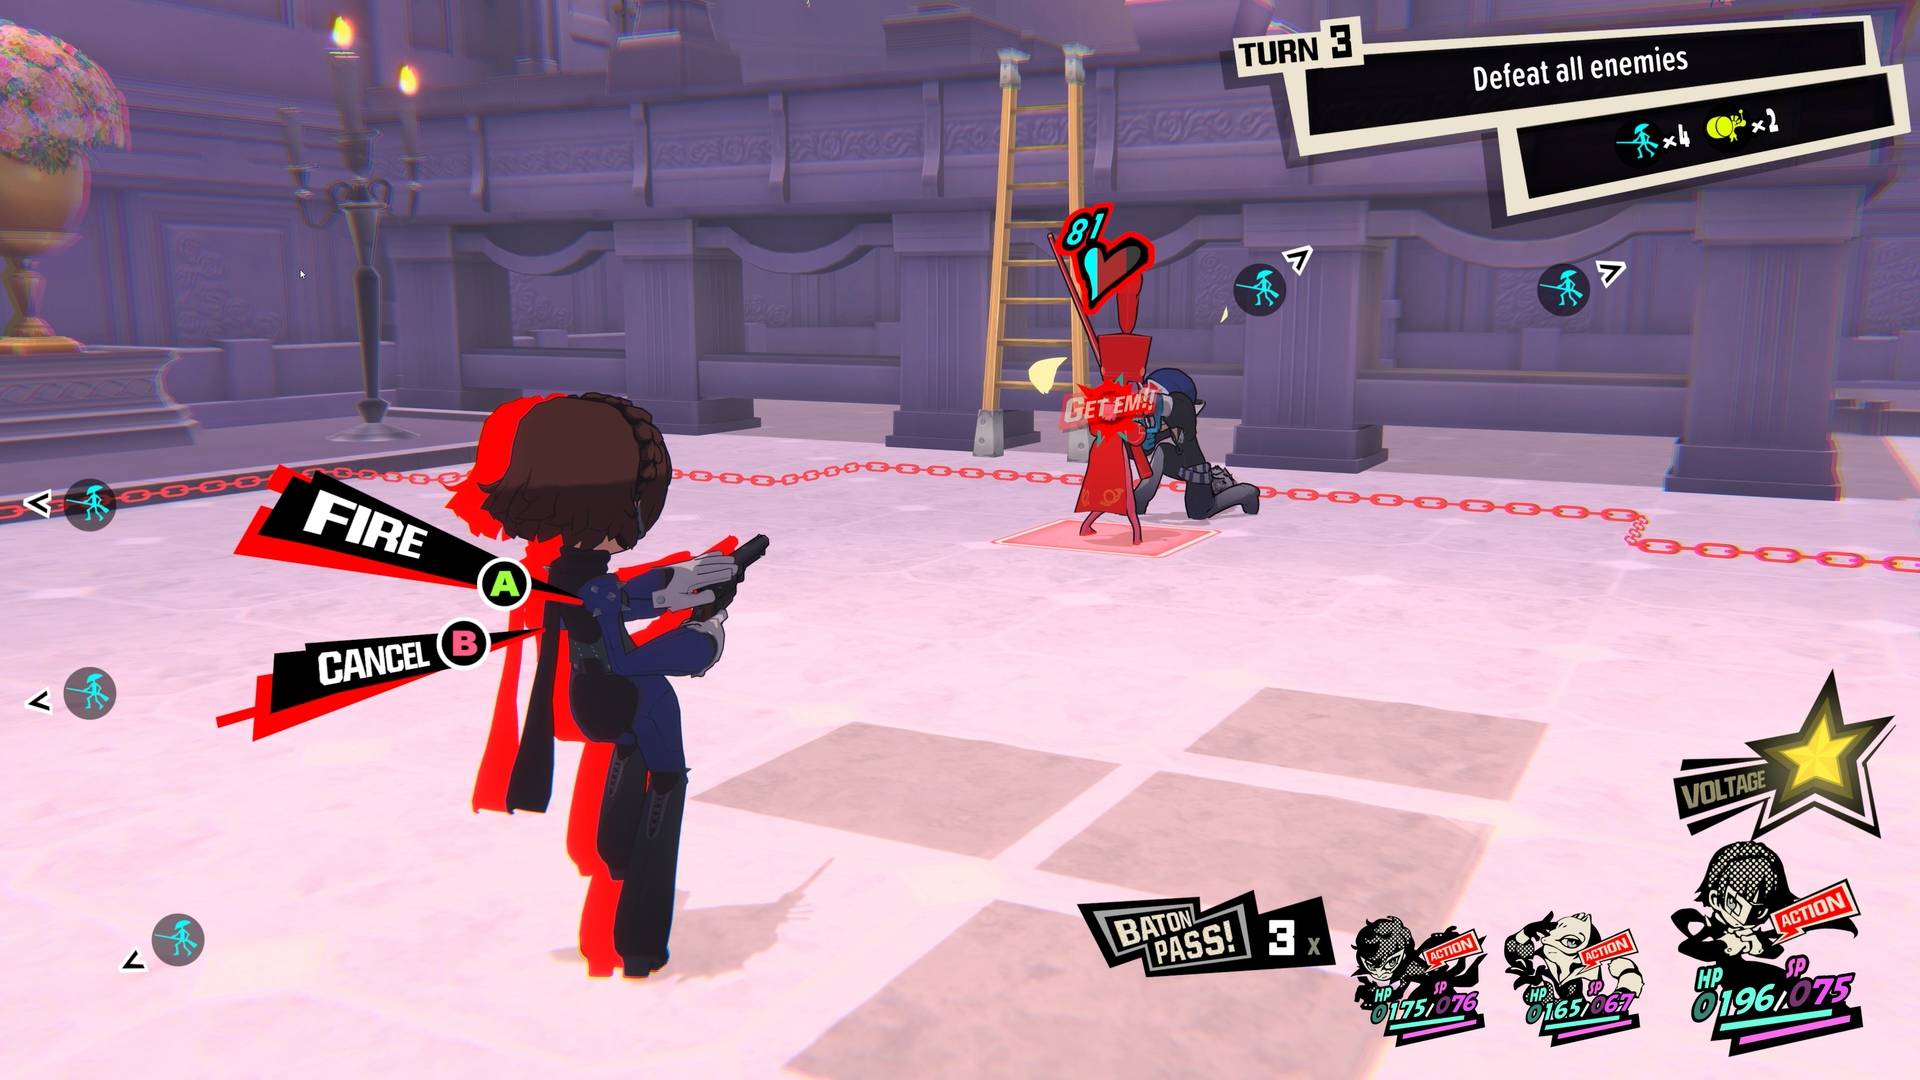 Persona 5 Tactica Reveals Full Story & Battle Gameplay Details